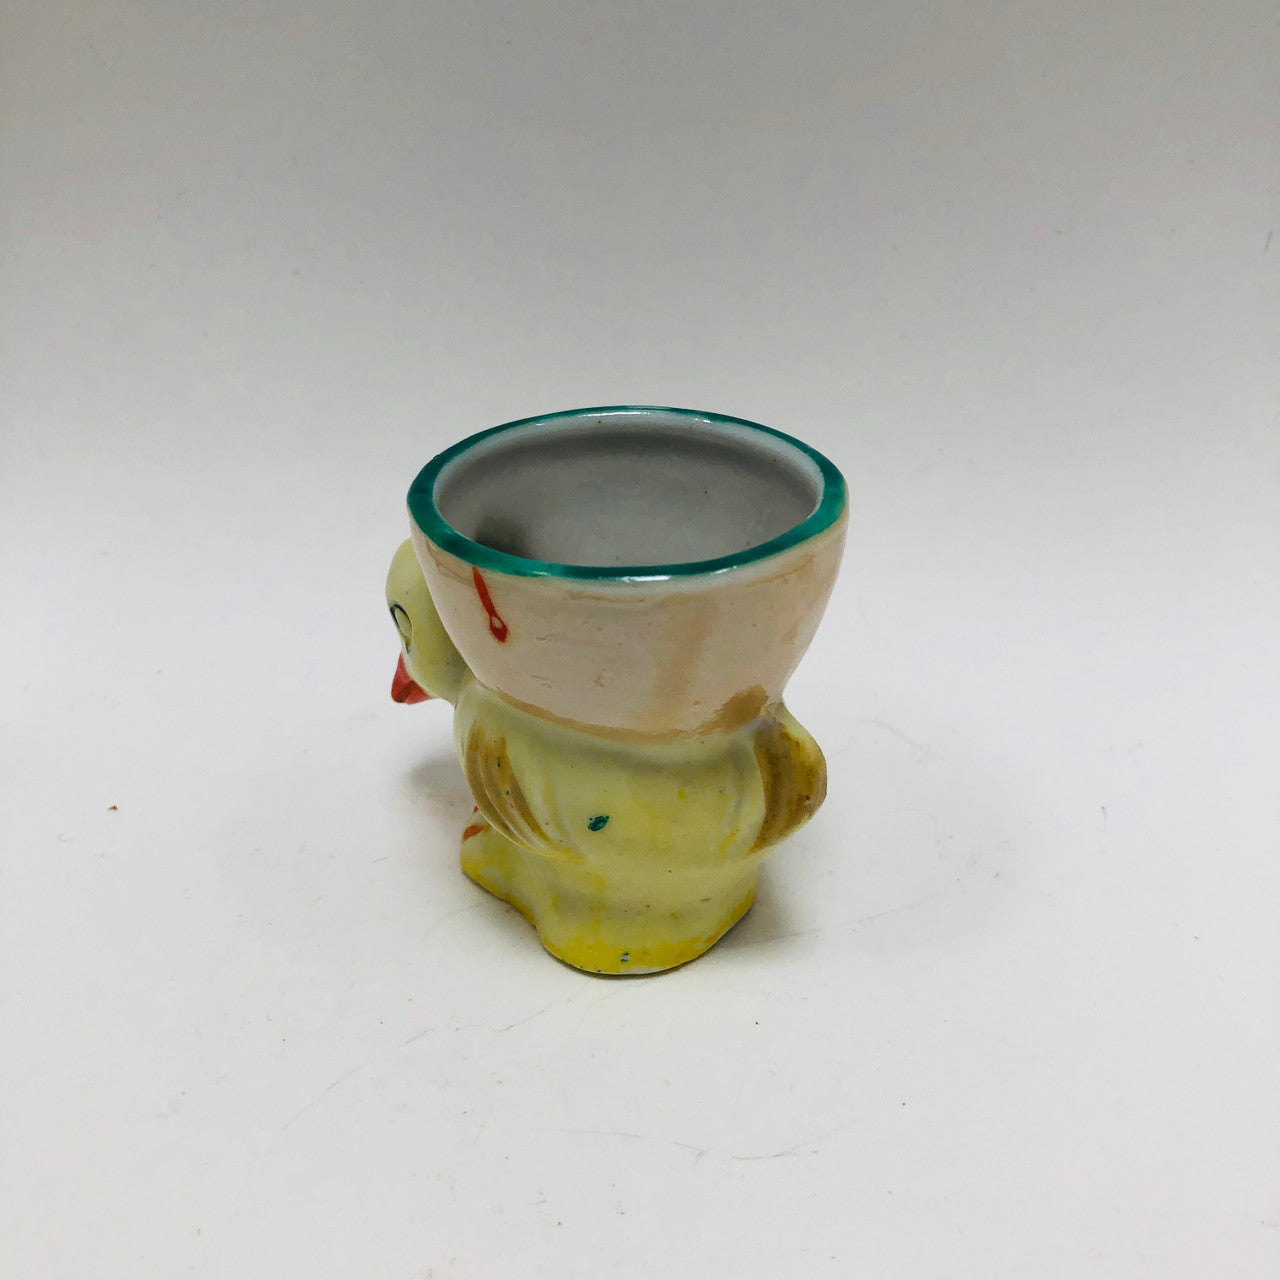 Ceramic, Vintage, Retro, Duckling, Figural, ~1950s, Egg Cup, Japan, Yellow